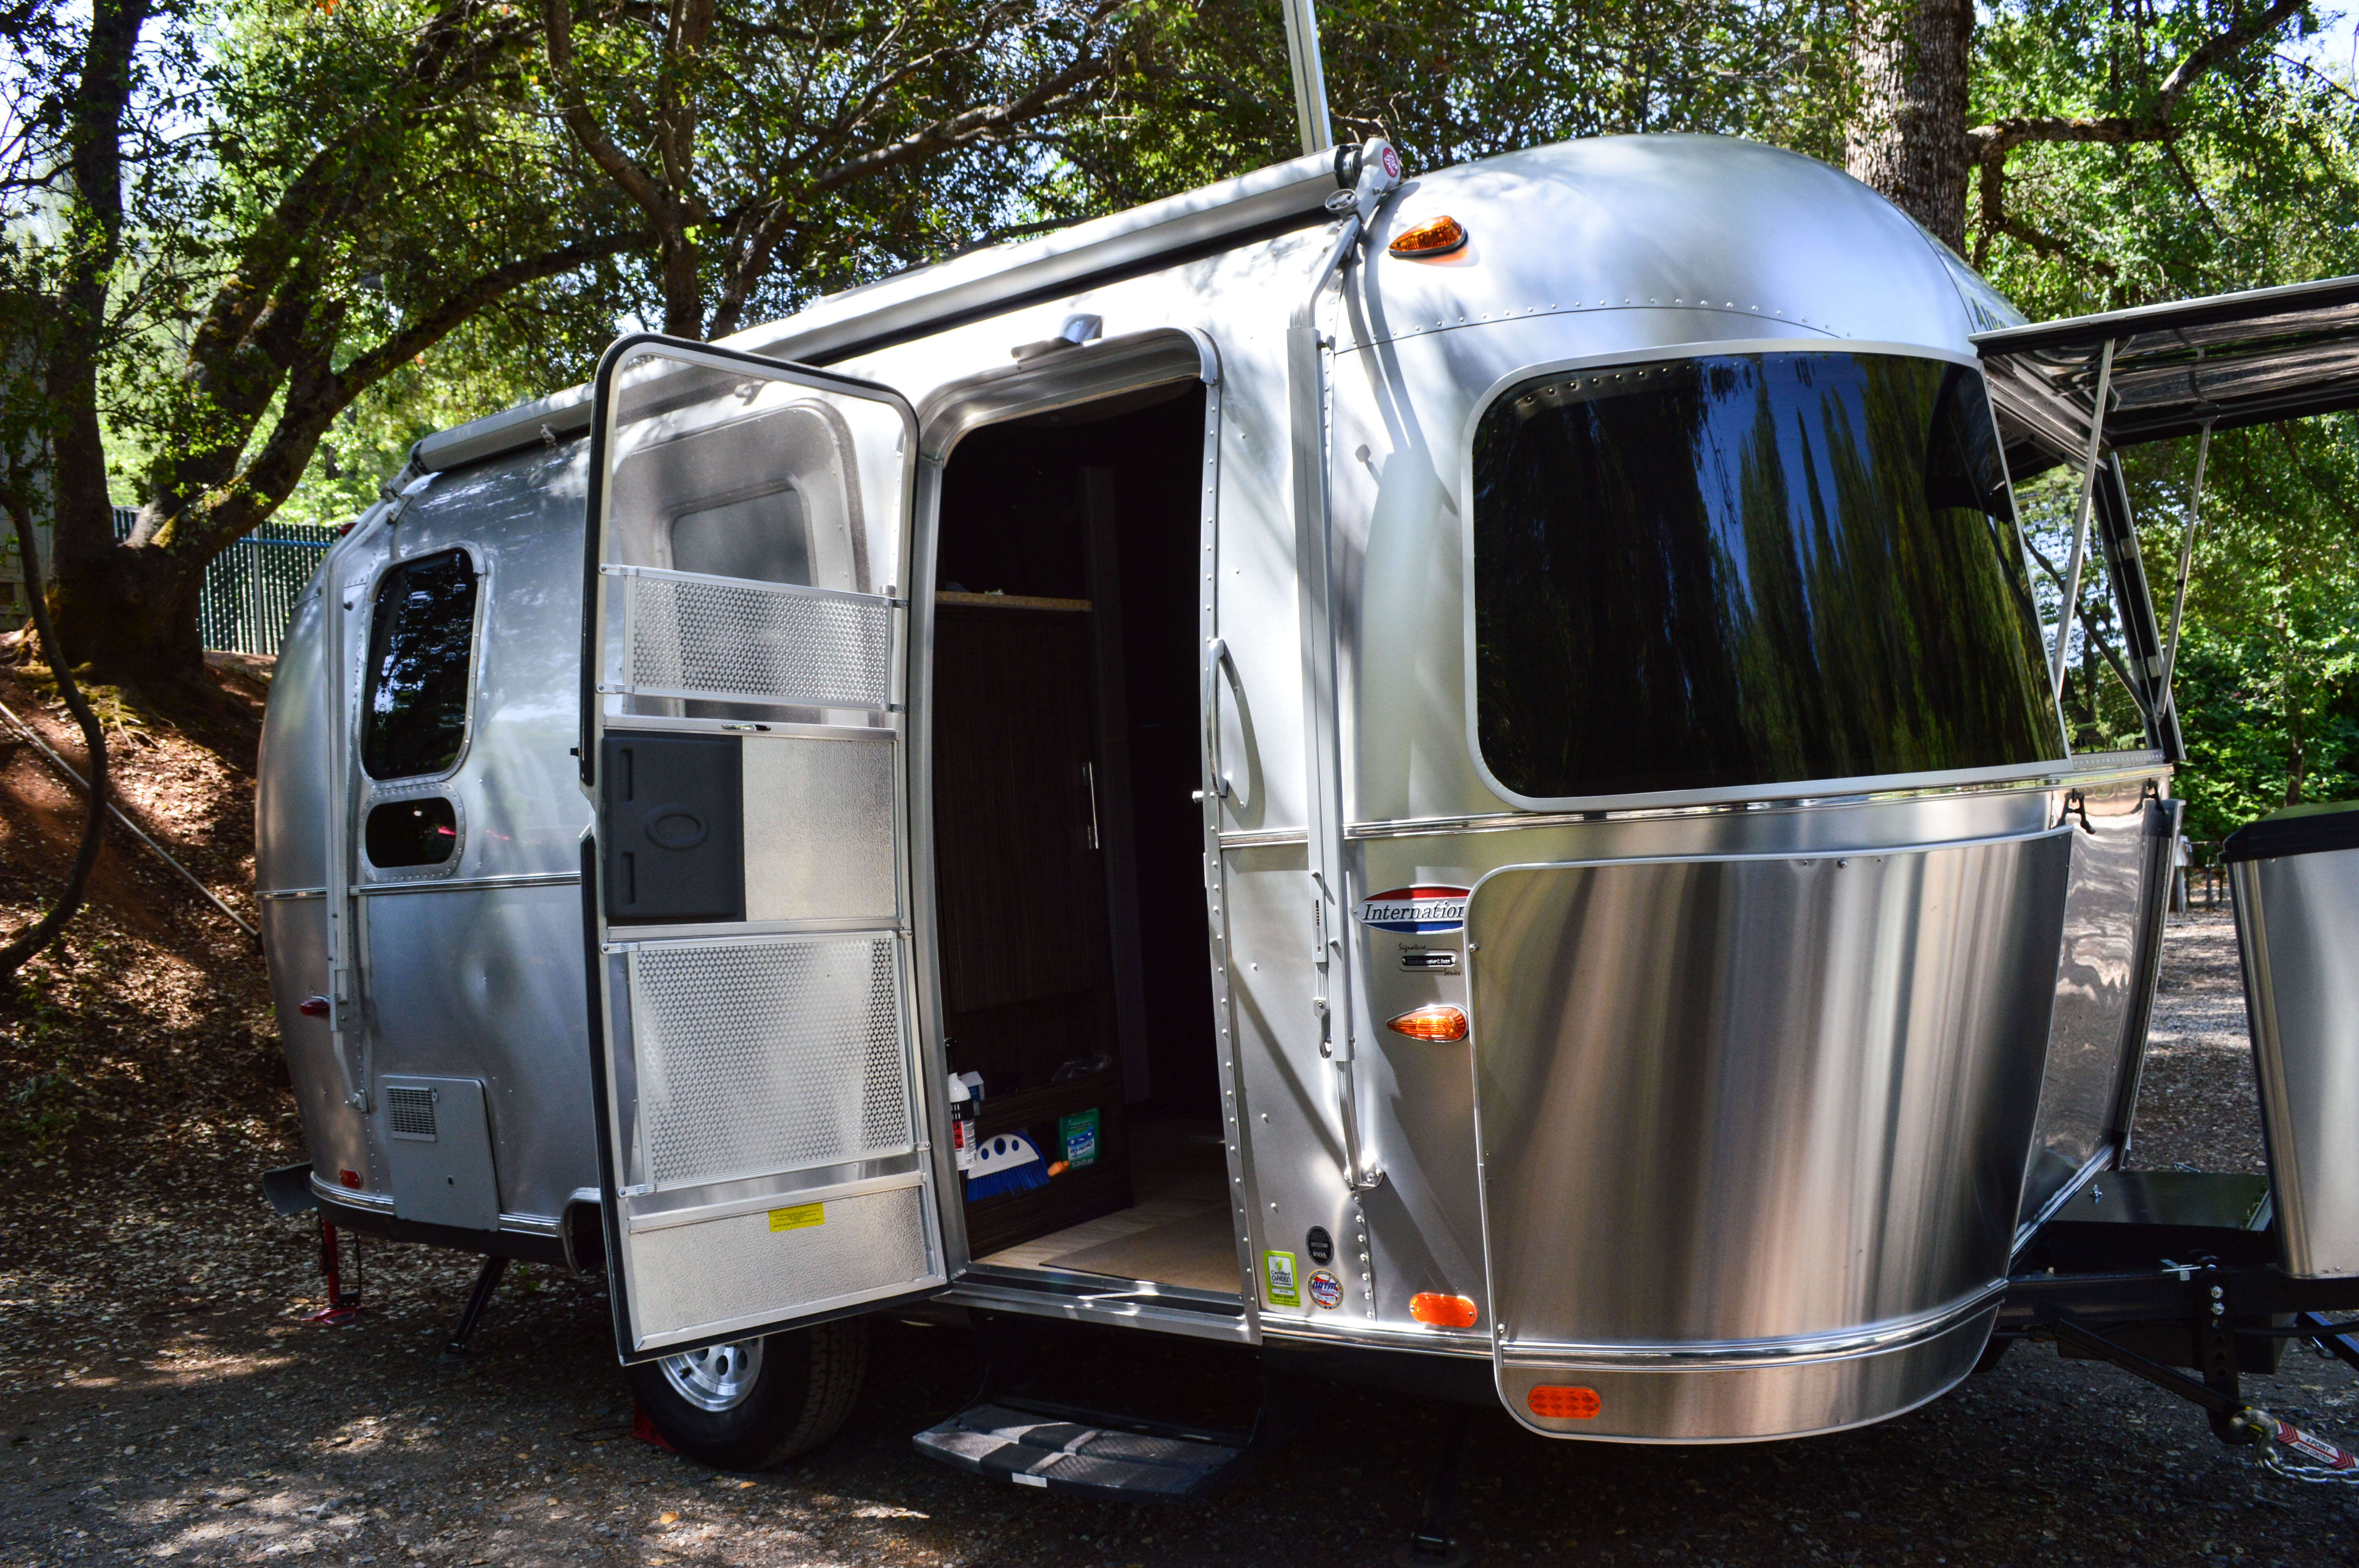 Staying in an Airstream is a nice compromise for people like me who want to...